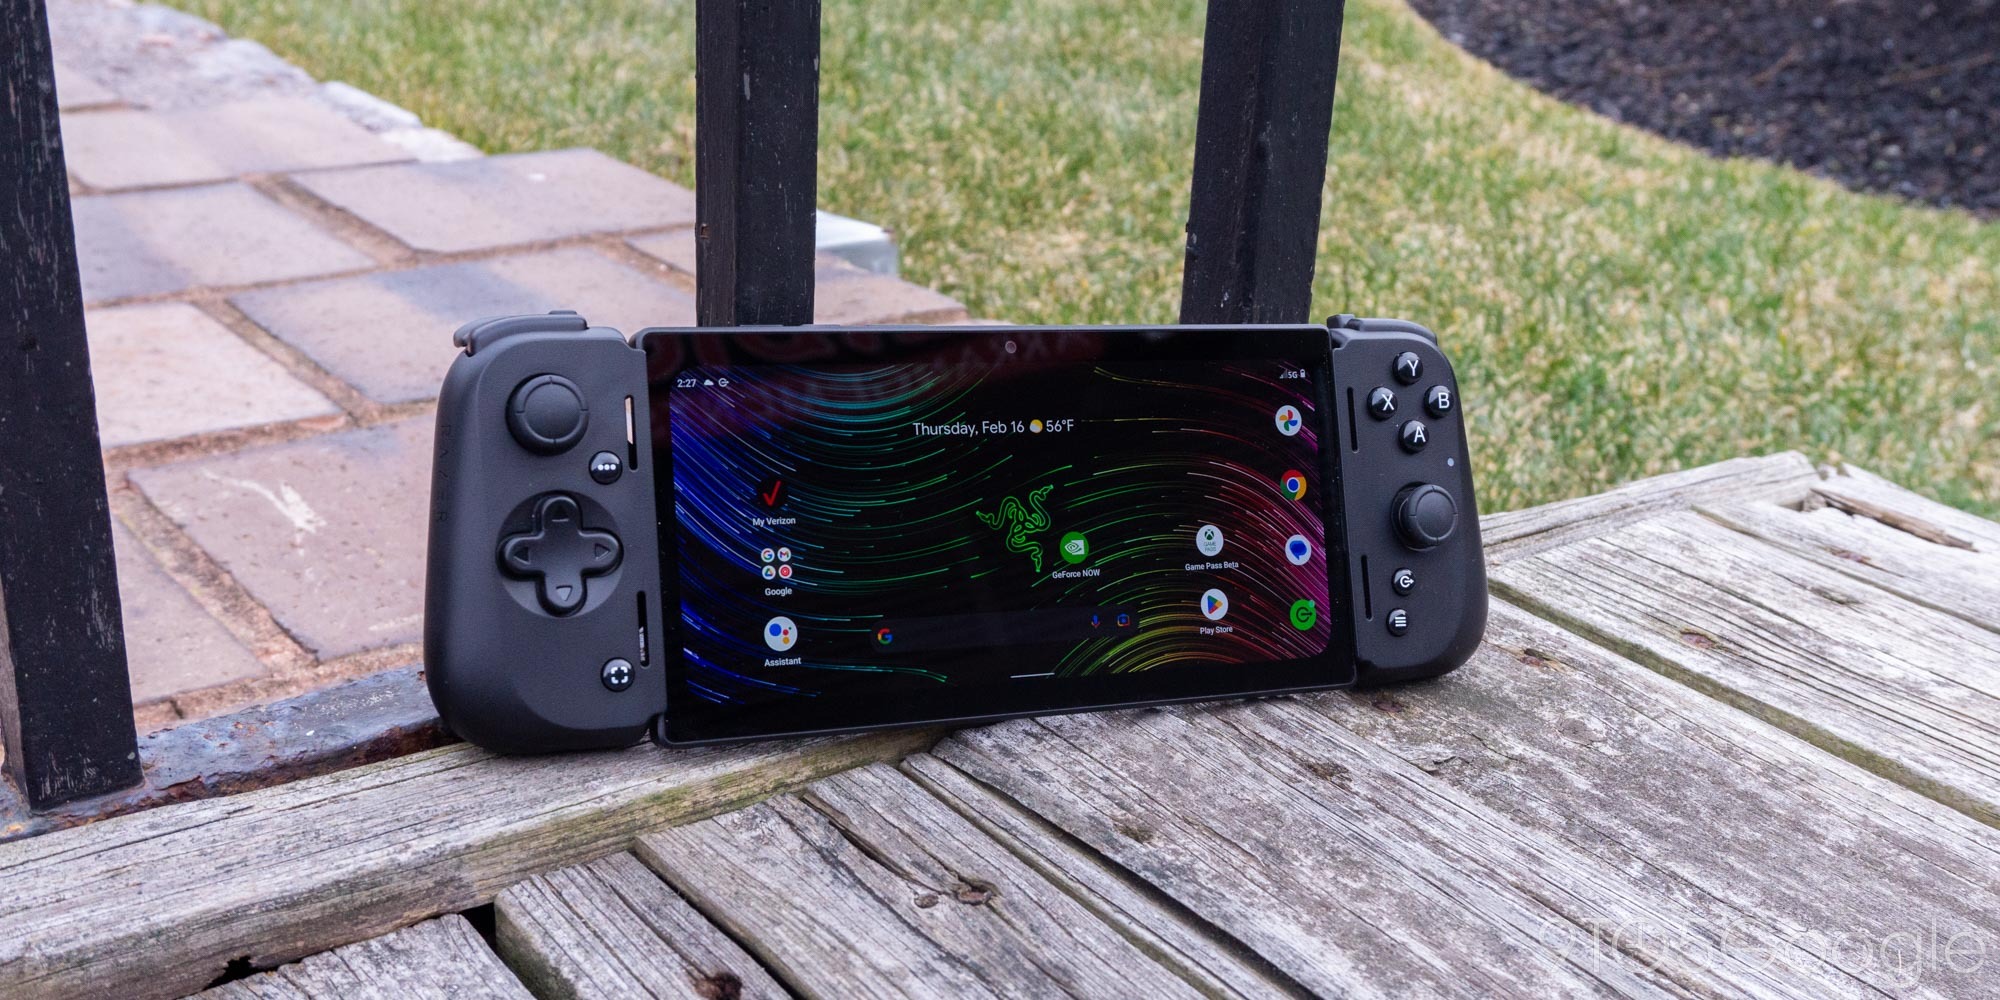 Razer Edge 5G Review: Who needs an Android gaming handheld?